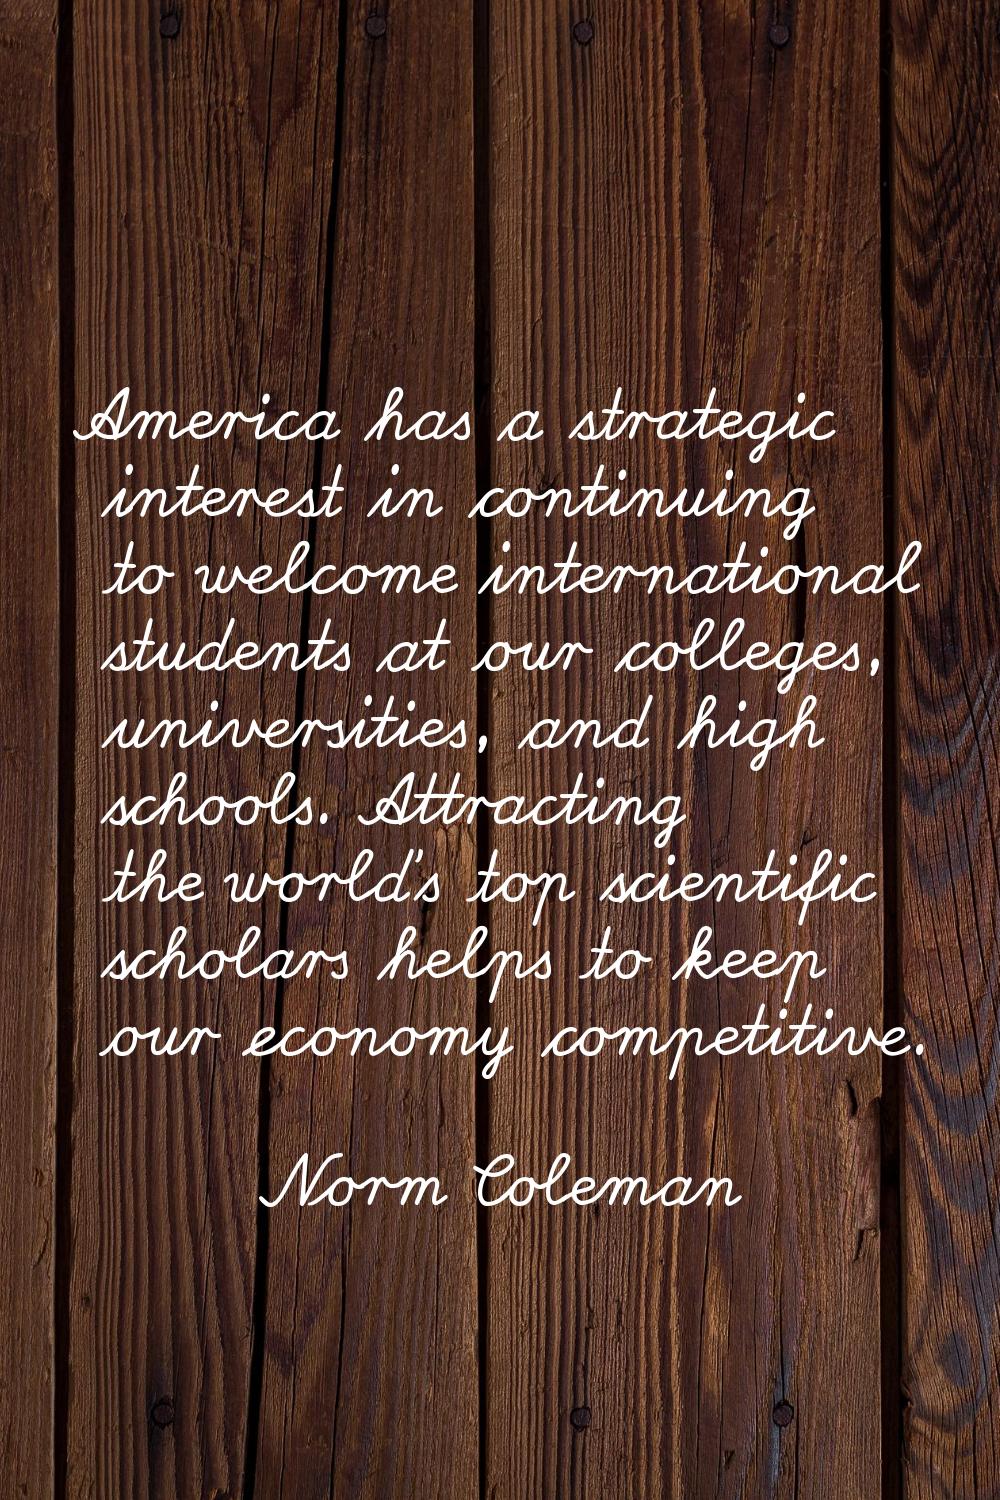 America has a strategic interest in continuing to welcome international students at our colleges, u